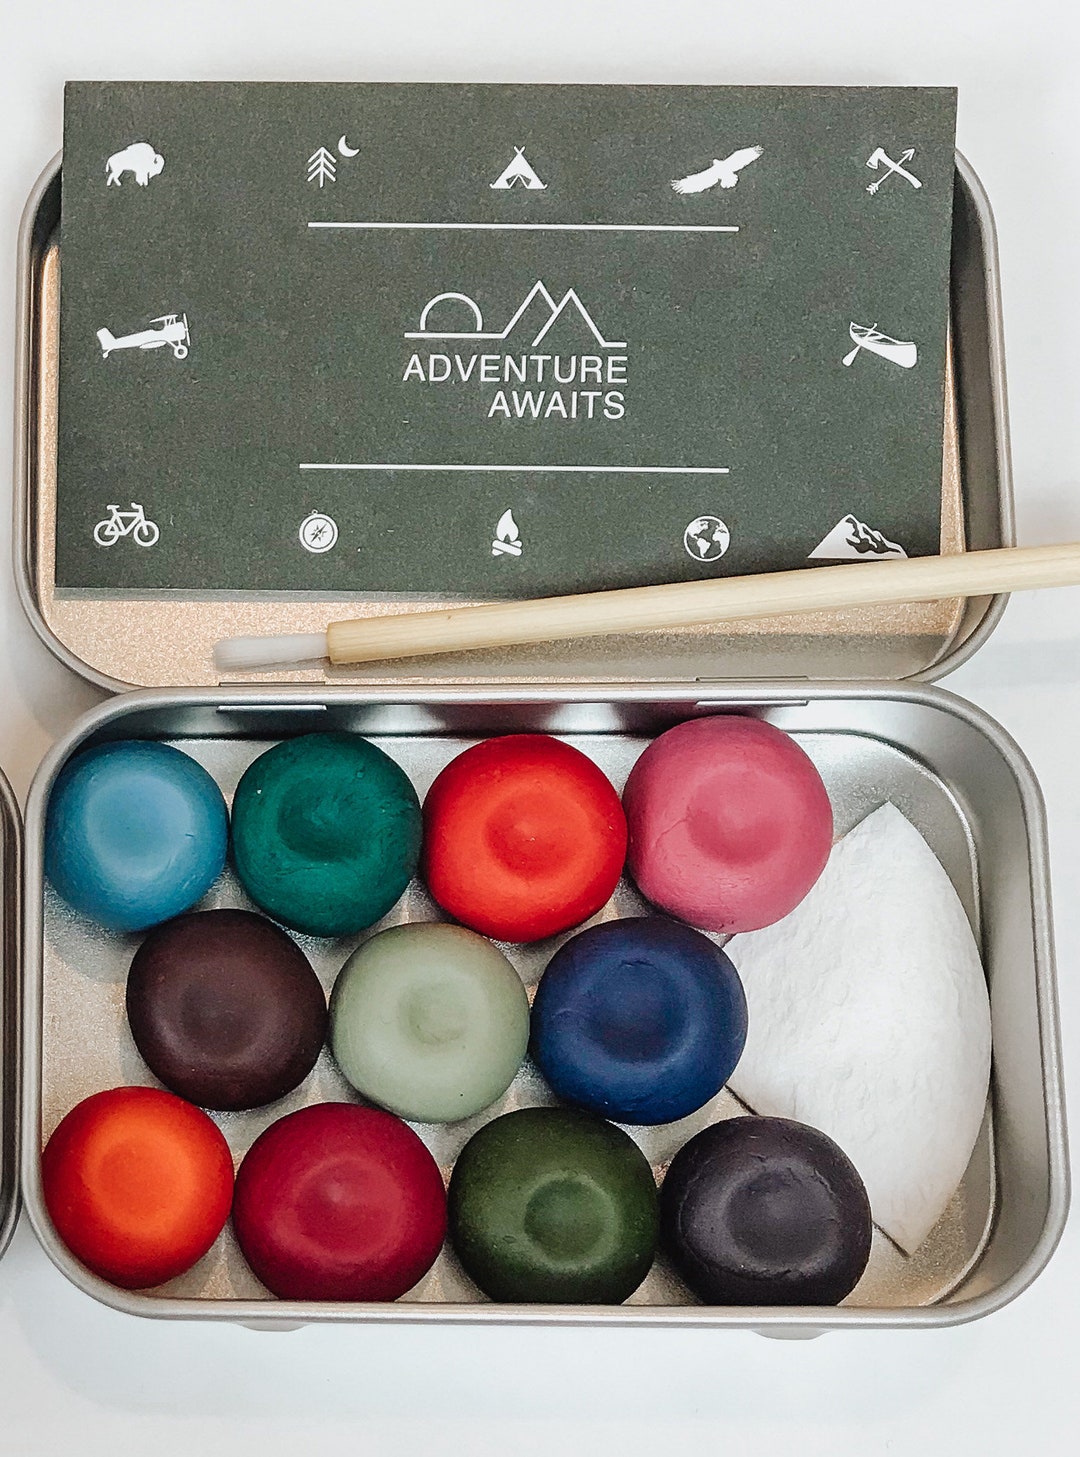 Retro Polytemps Paint Set. 1960s Polymer Tempera Paint Palette Set.  American Art and Clay Company 